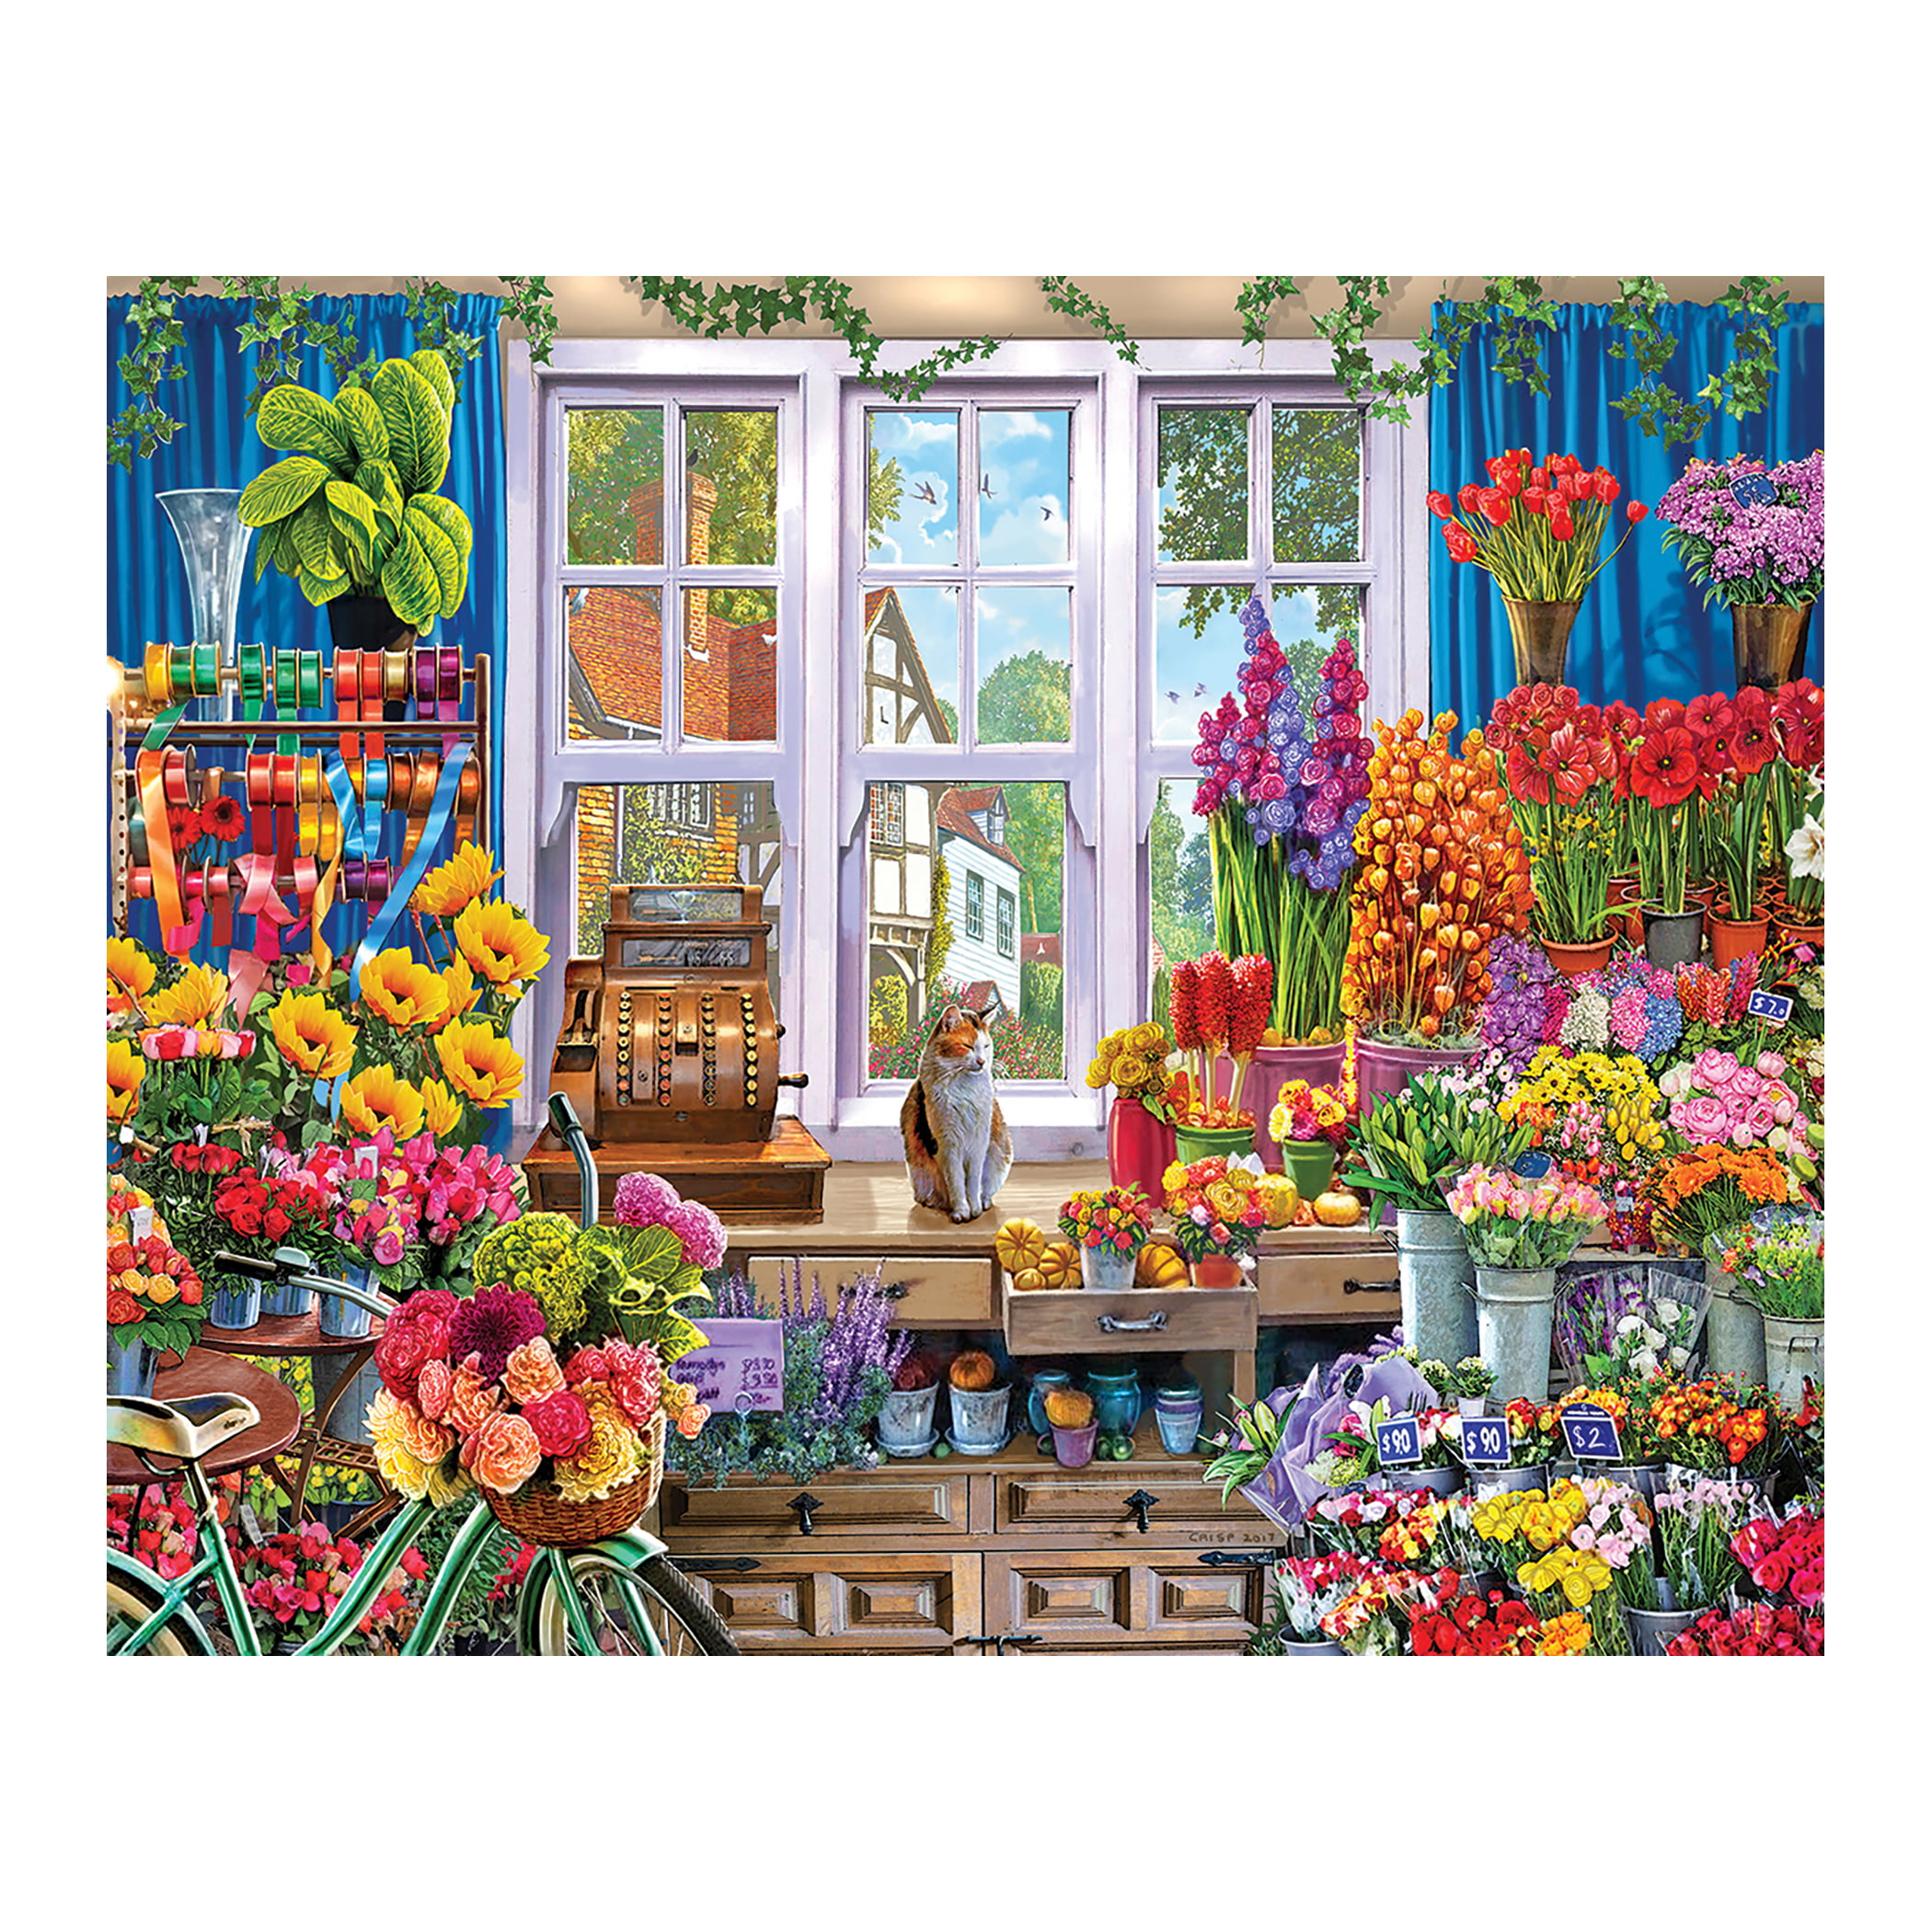 Page Publications Collection Flower Shop Jigsaw Puzzles 1000 Pieces Kids Adults 